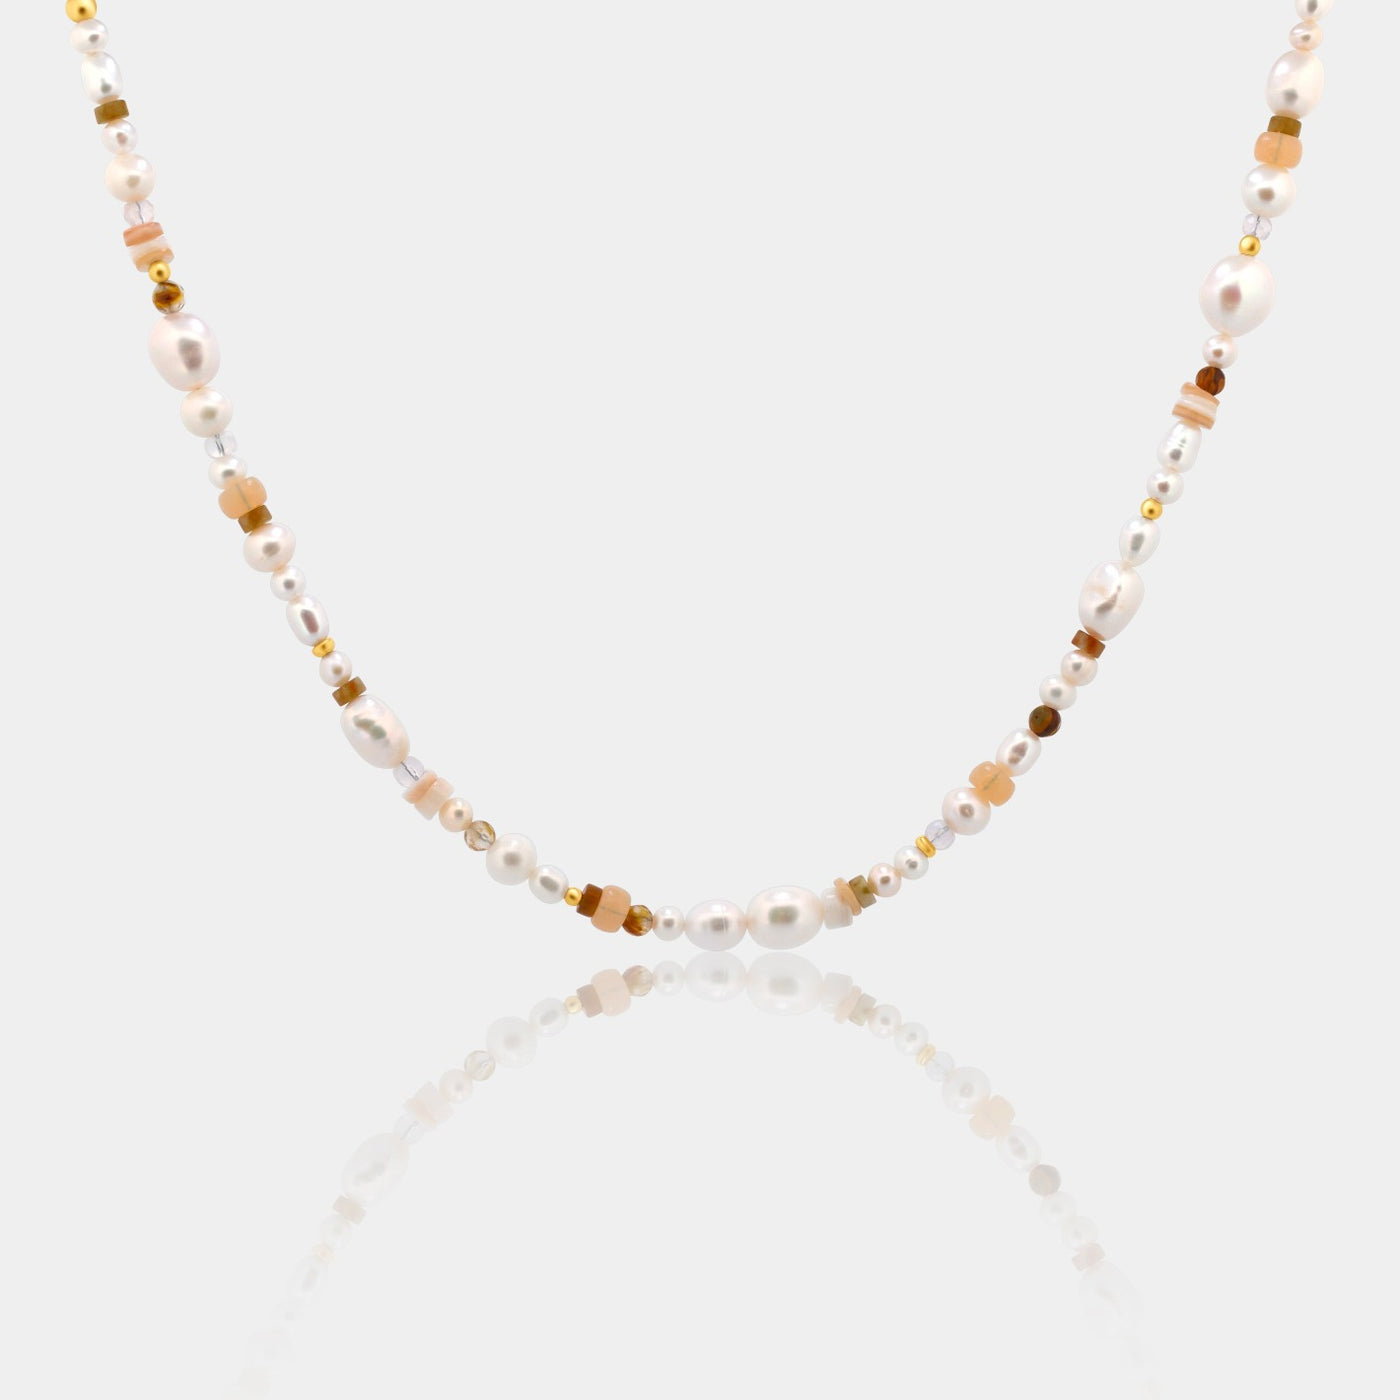 mixed pearl necklace. freshwater pearl necklace with natural gemstones. Manana coastal jewelry collection.